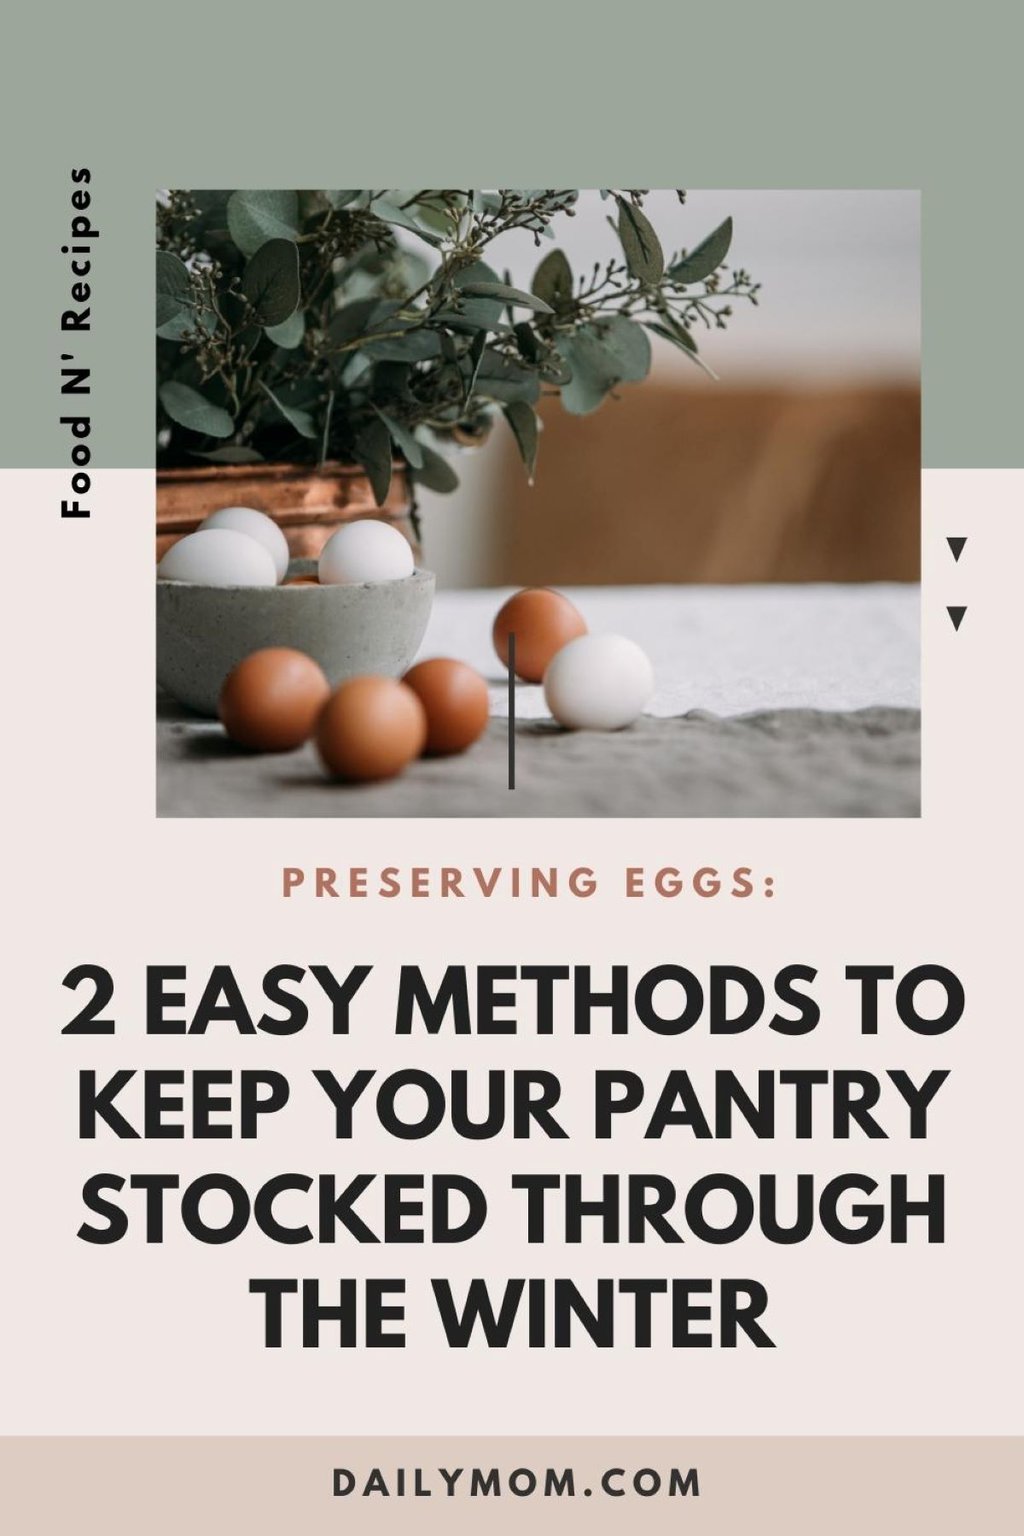 Preserving Eggs: 2 Easy Methods To Keep Your Pantry Stocked Through The Winter